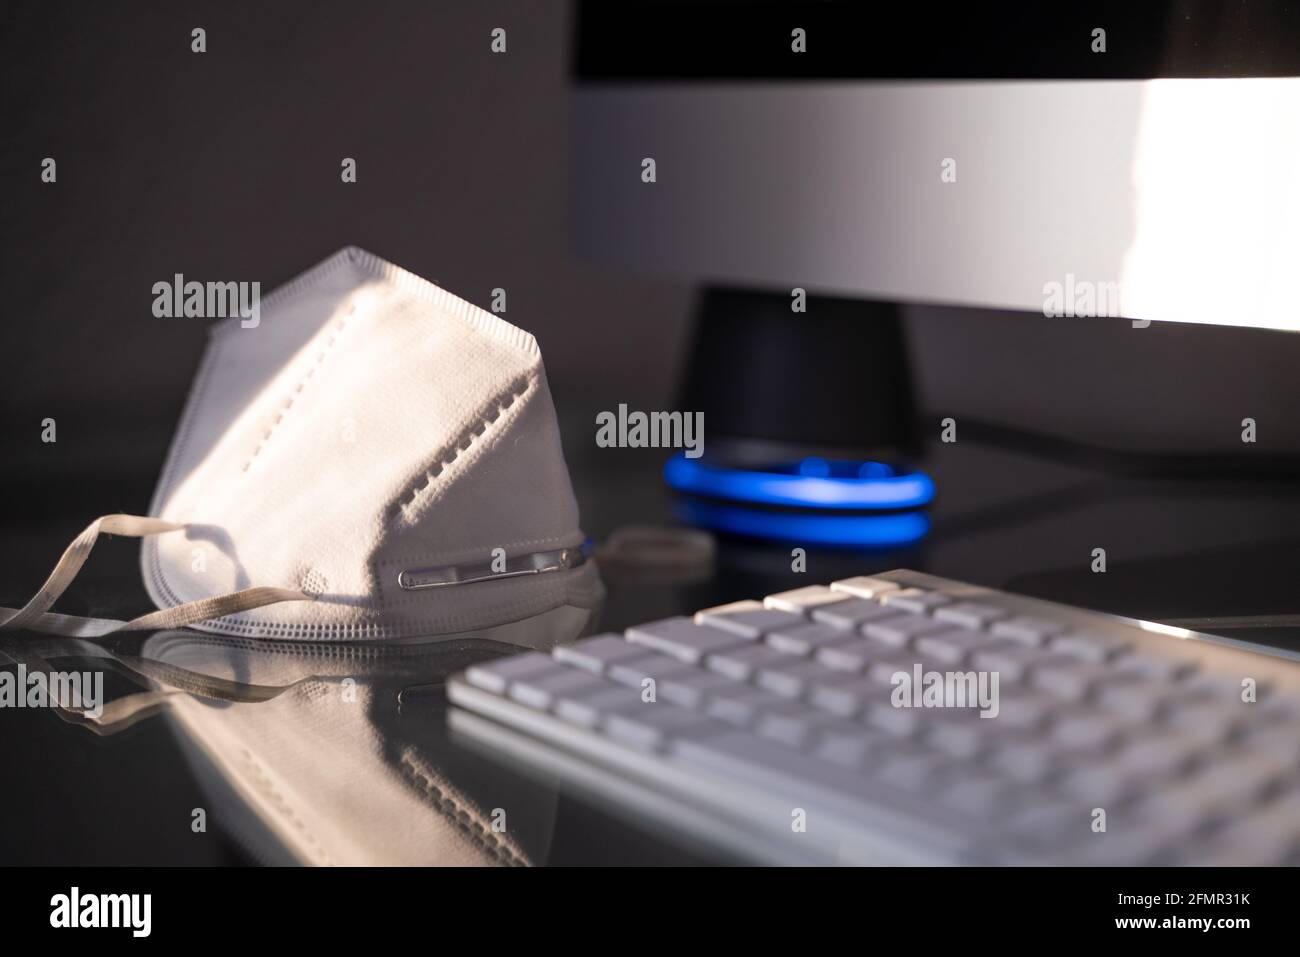 a mask on a table with keyboard and monitor Stock Photo